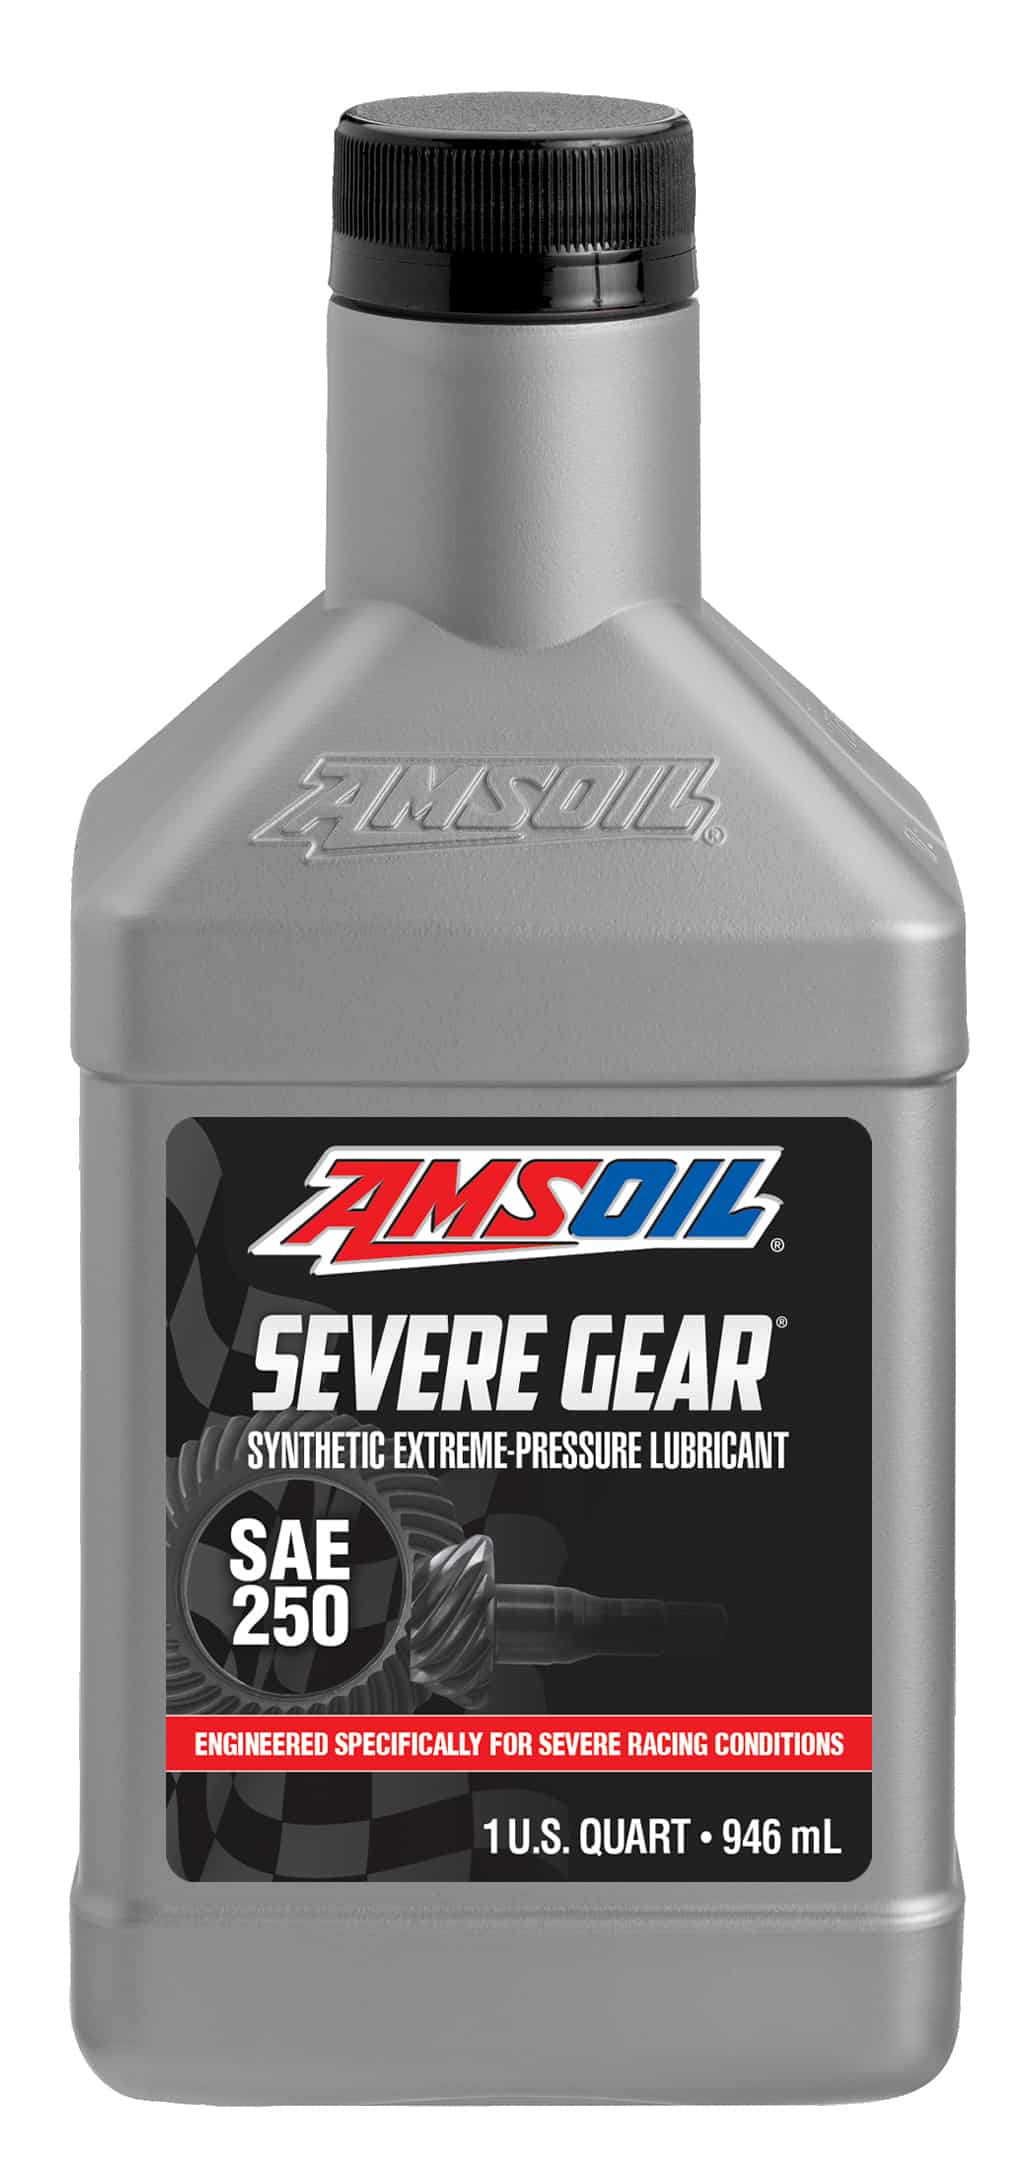 SEVERE GEAR® EP Synthetic Racing Gear Lubricant